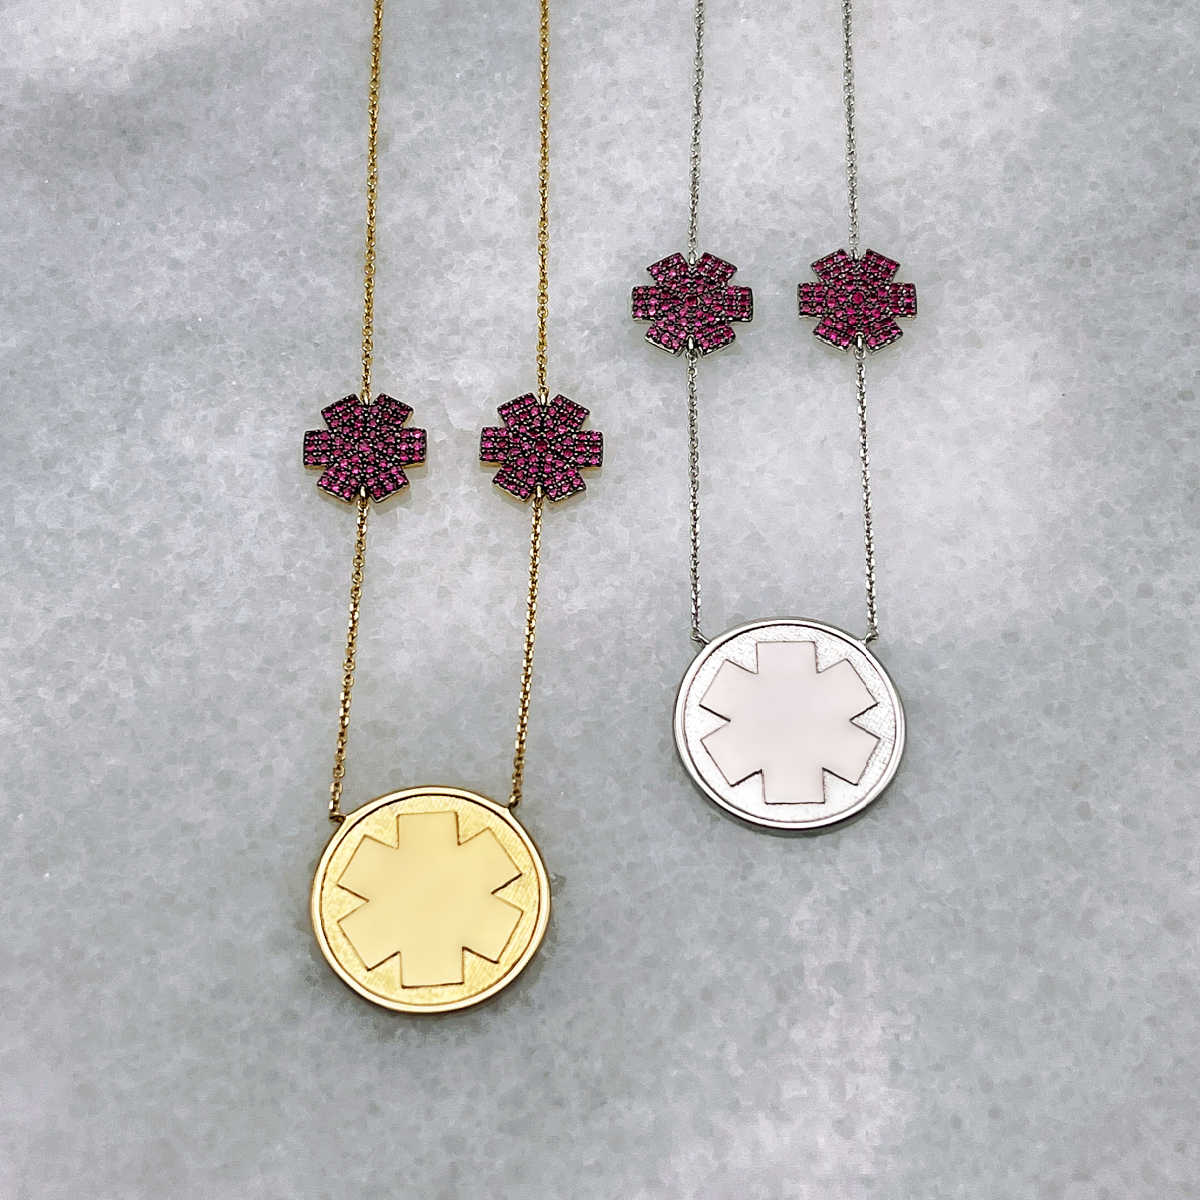 Gold Medical Alert Necklace | Ruby Station Women’s Medical ID Necklace | Stylish Med ID Necklace | Diabetic Necklace | Charmed Medical Jewelry 